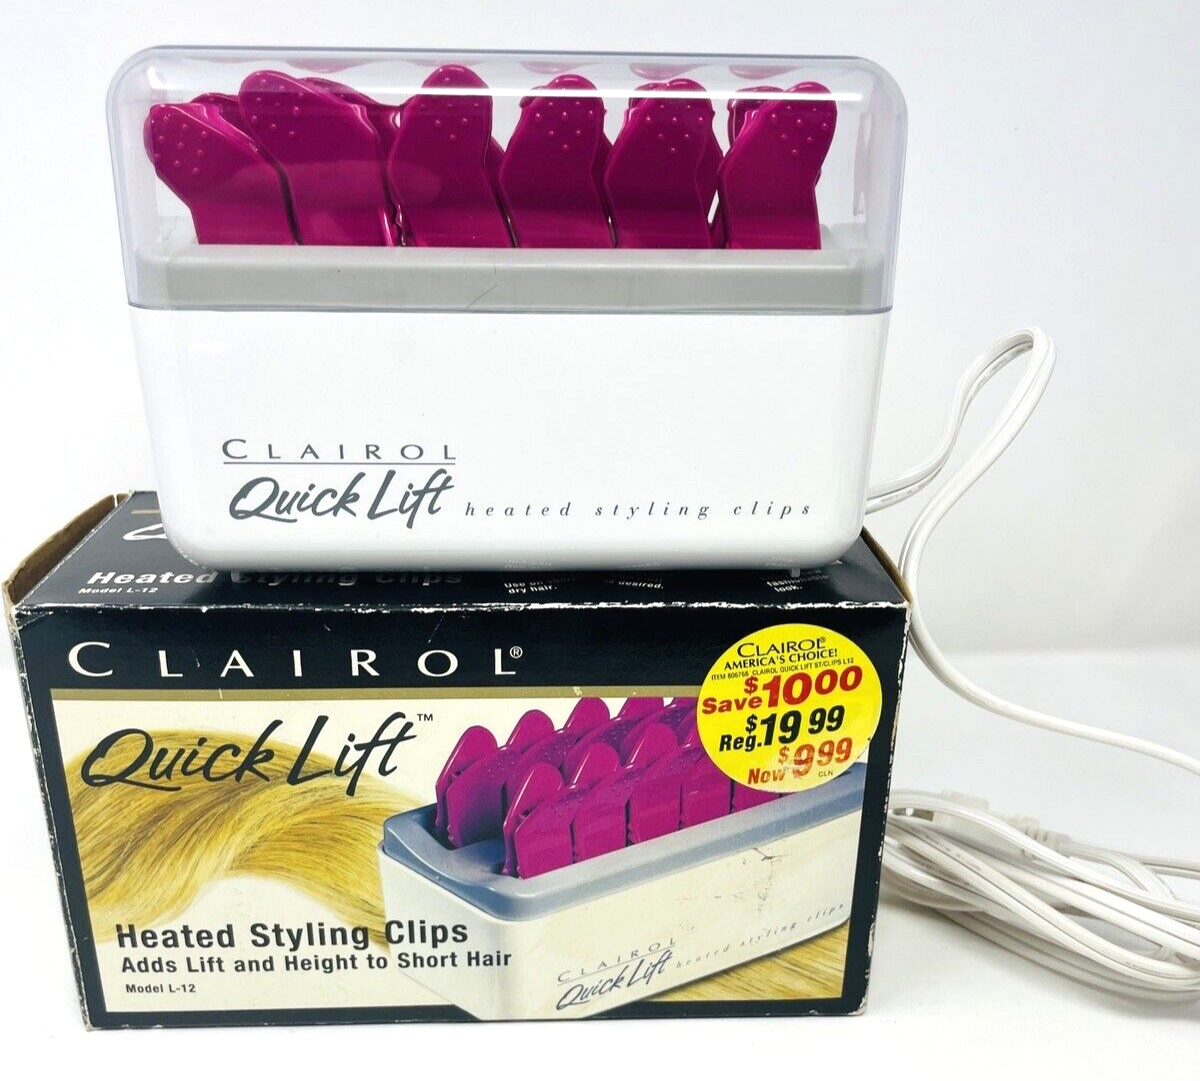 Primary image for Clairol Quick Lift Heated Styling Clips Root Lifter Pink Vintage Hair